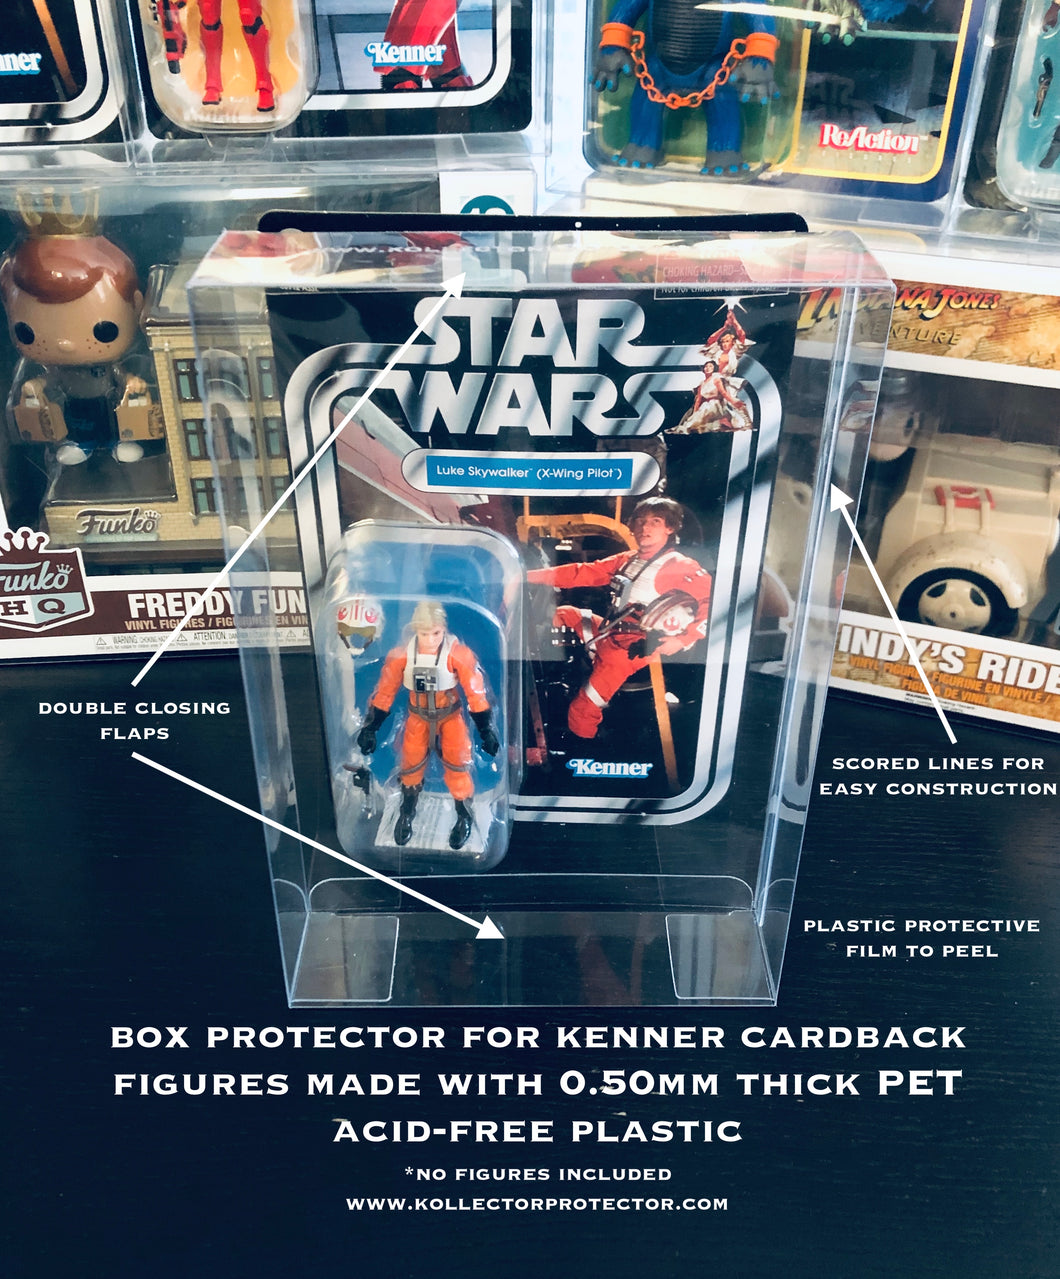 Kenner Star Wars Card Back Figure Protector made with 0.50mm thick PET Acid-Free Plastic